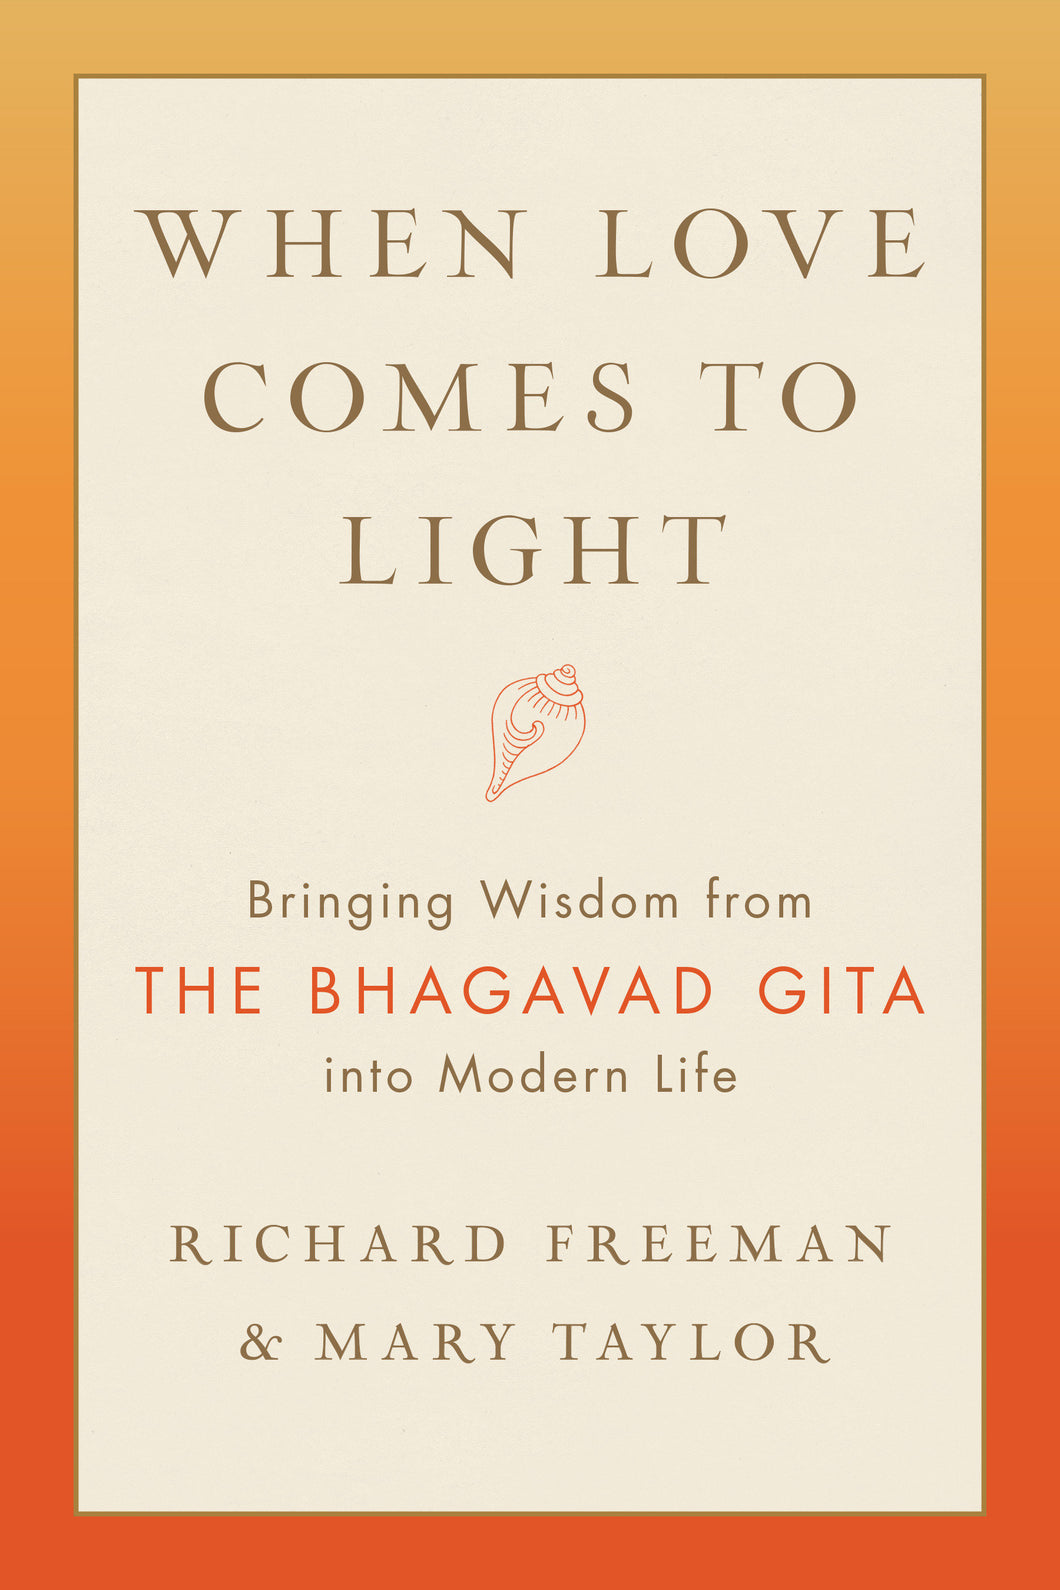 When Love Comes to Light: Bringing Wisdom from the Bhagavad Gita into Modern Life